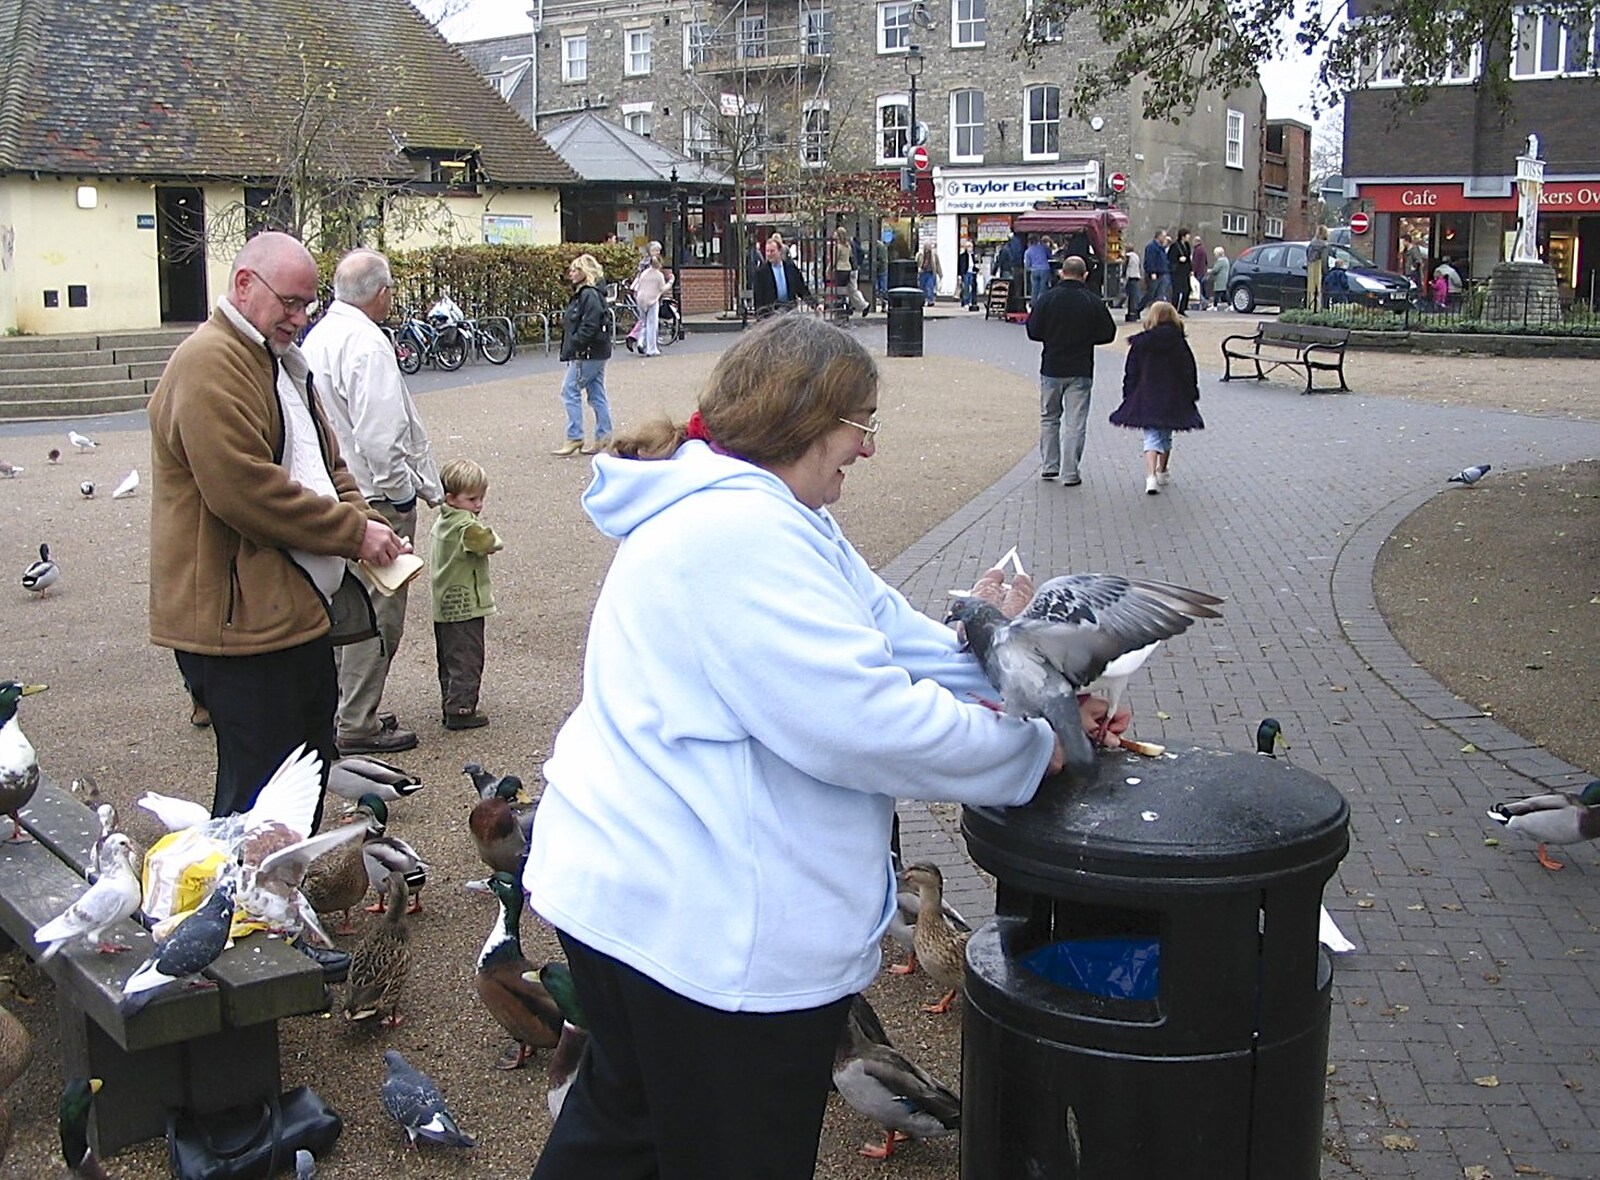 Putting the pigeons on the bin from Feeding the Ducks: a Diss and Norwich Miscellany - 7th November 2004